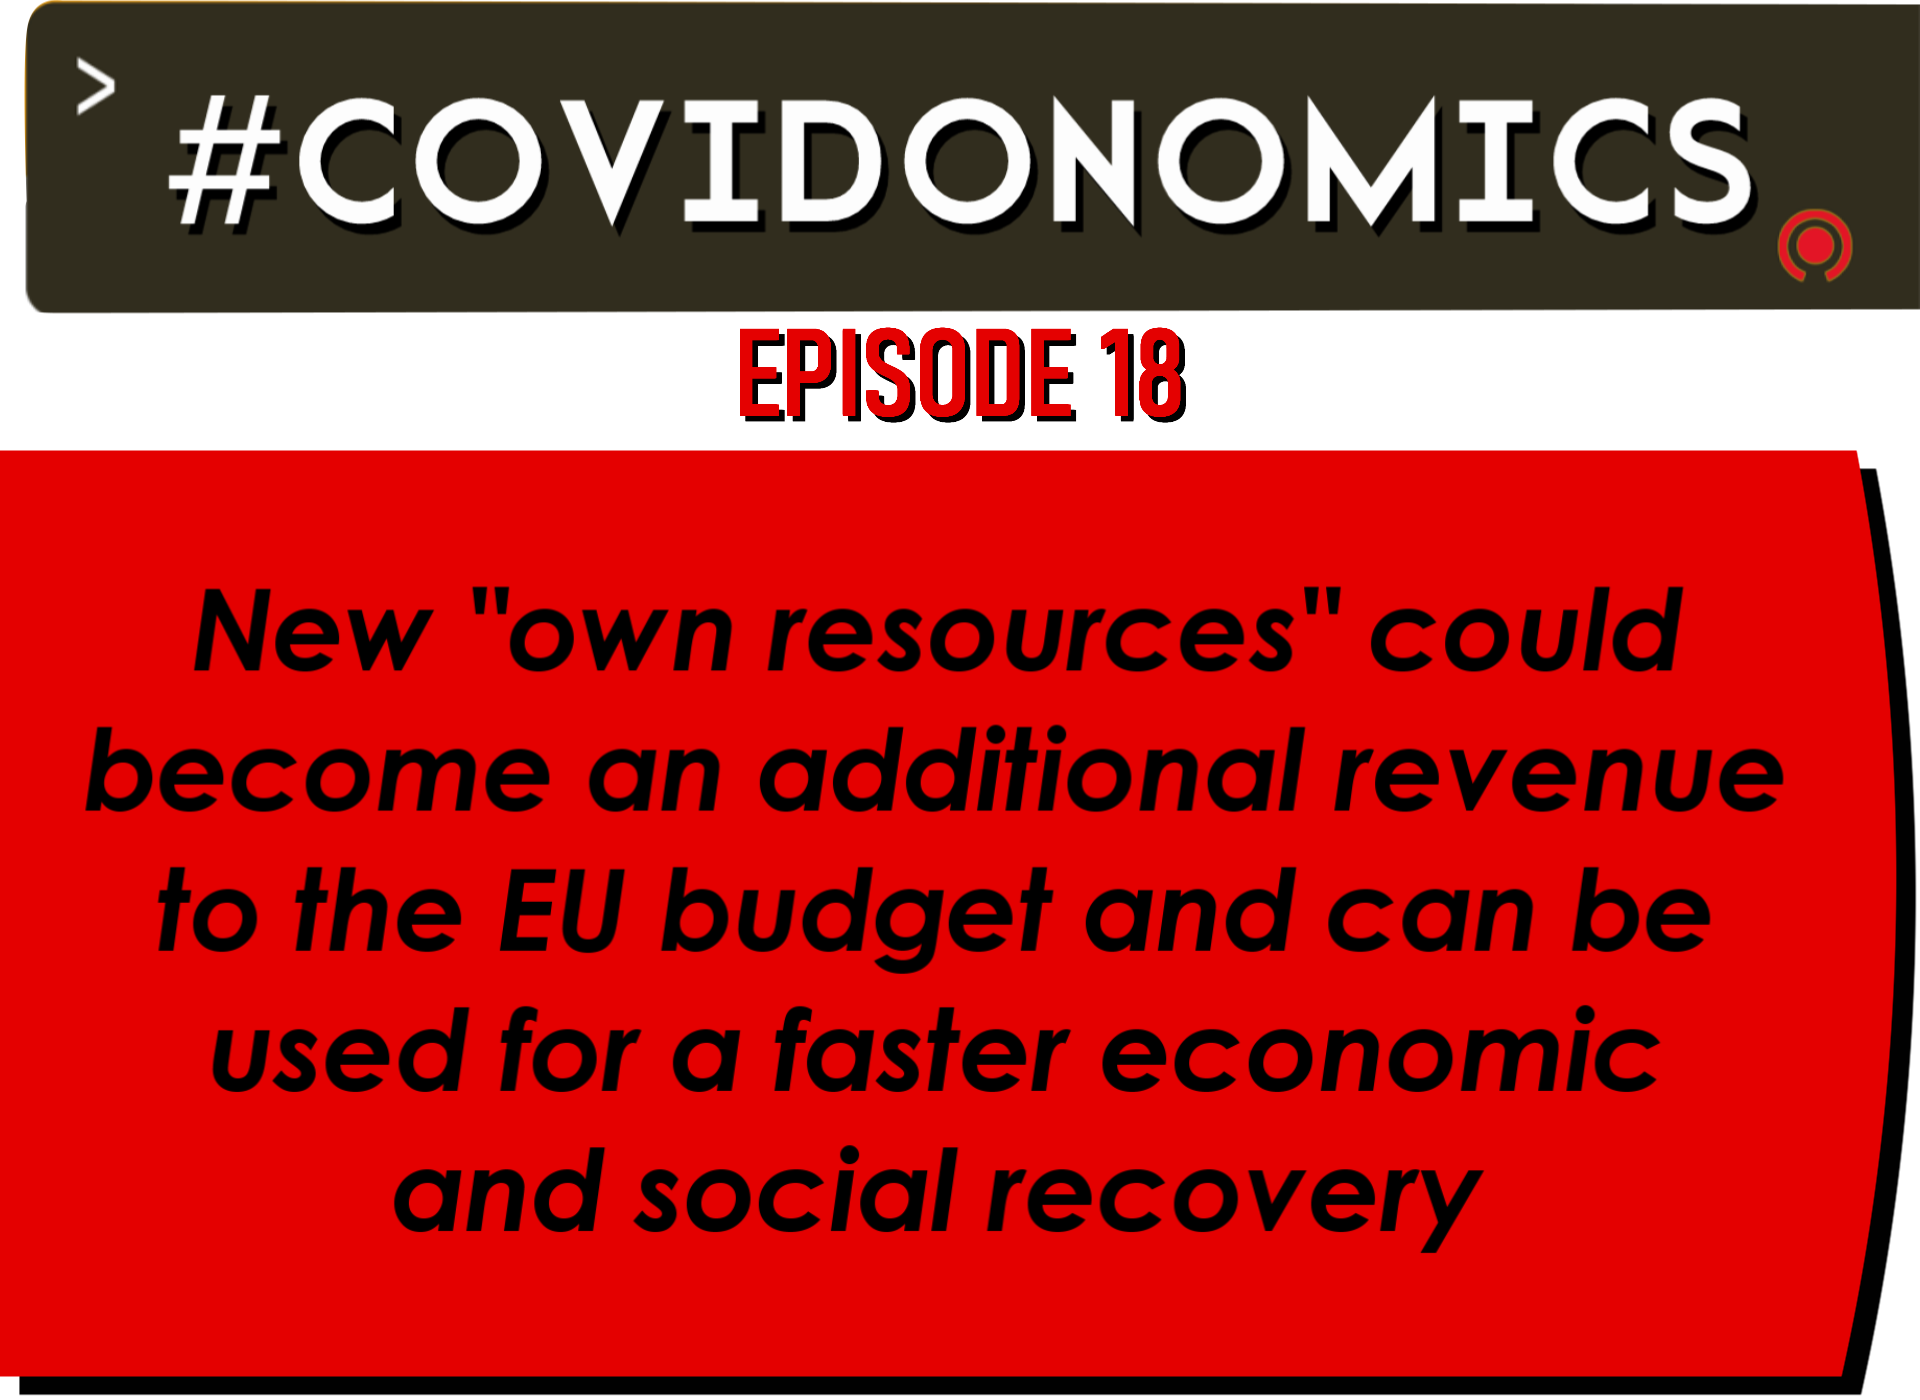 New "own resources" could become an additional revenue to the EU budget and can be used for a faster economic and social recovery